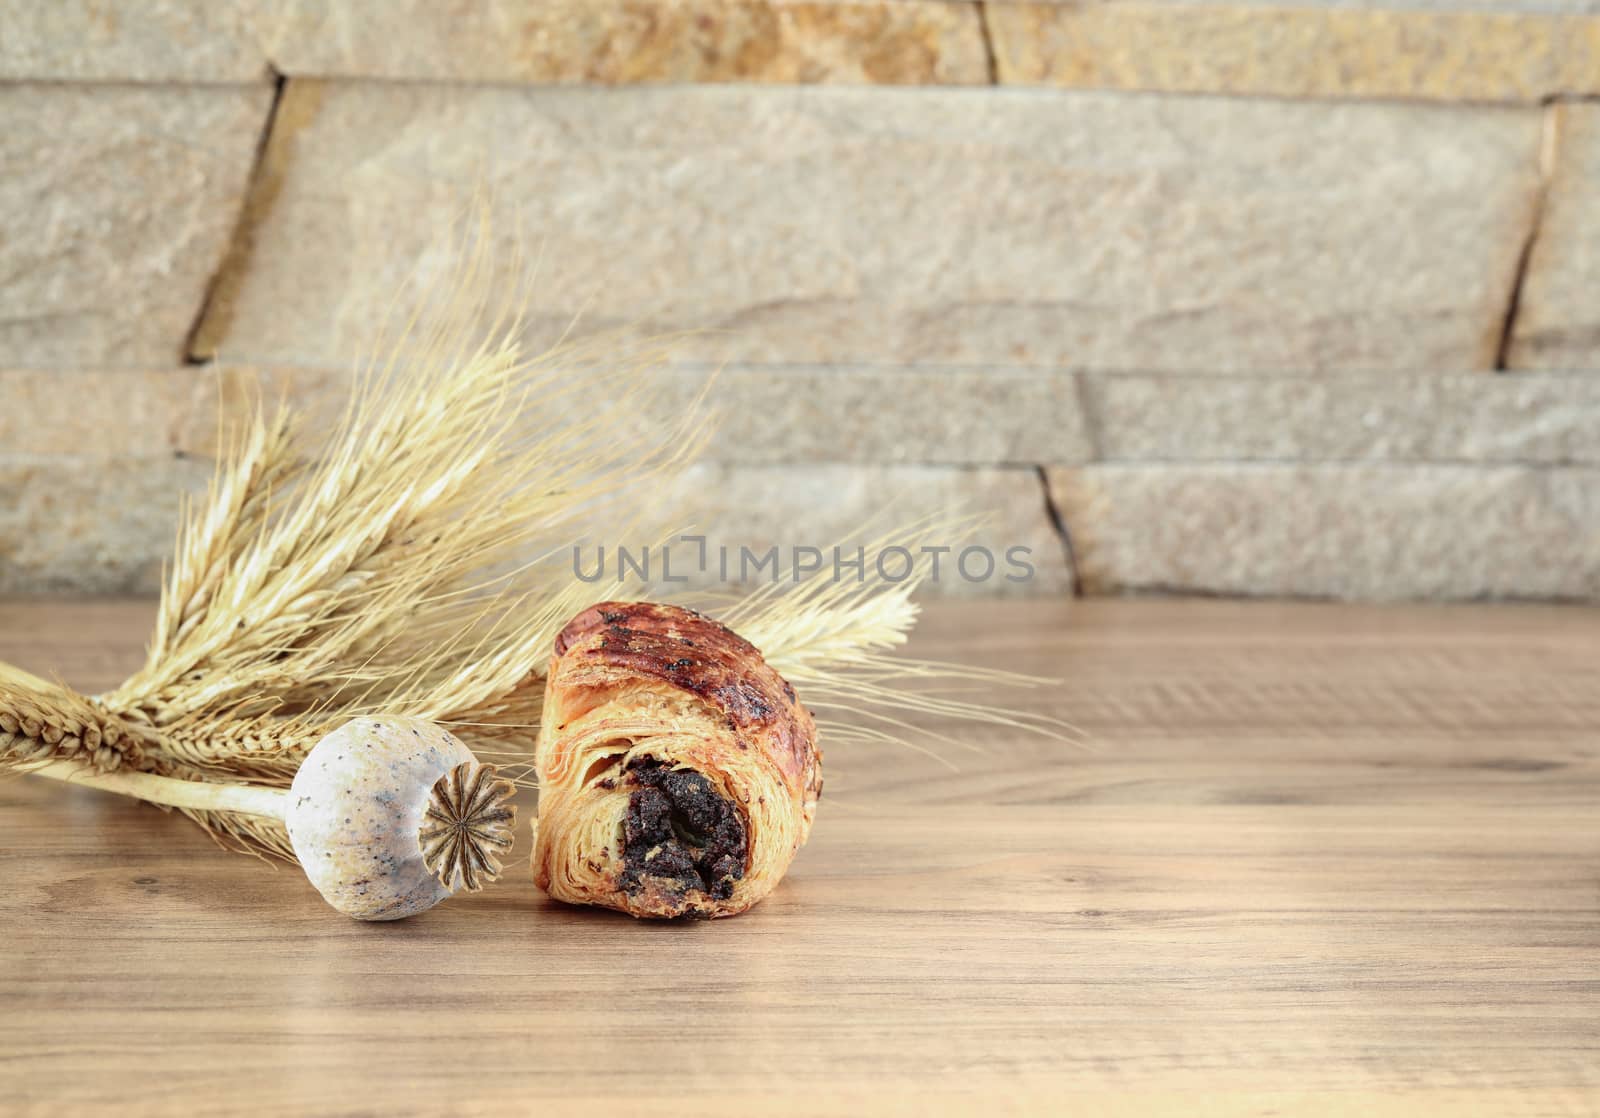 A sweet roll with poppy lies on a wooden table and near a stone wall - sandstone. Poppy head and spikelets lie near sweet roll